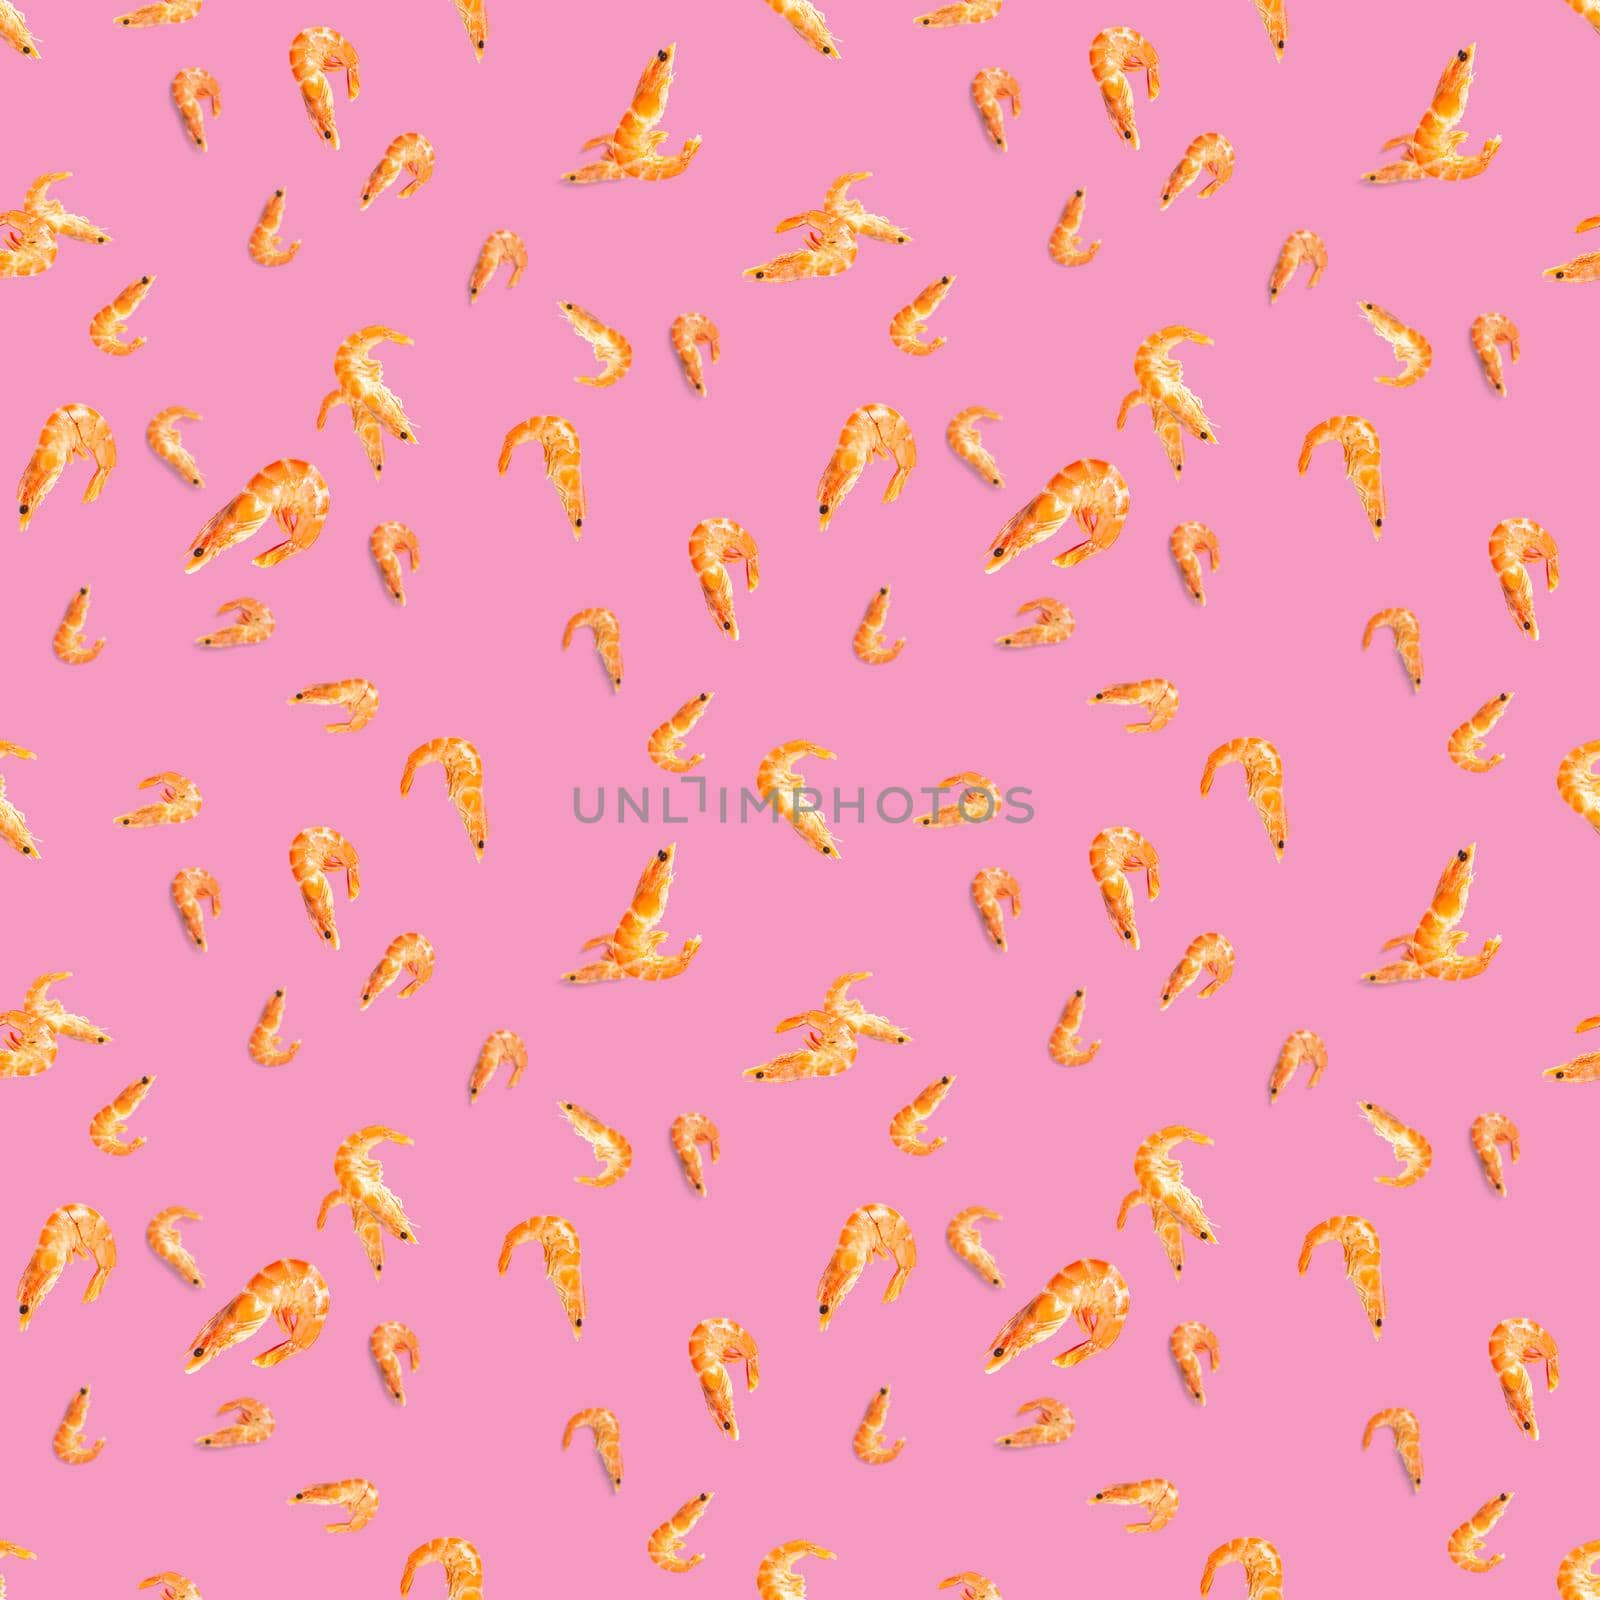 Seamless pattern made from Prawn isolated on a pink background. Tiger shrimp. Seafood seamless pattern with shrimps. seafood pattern